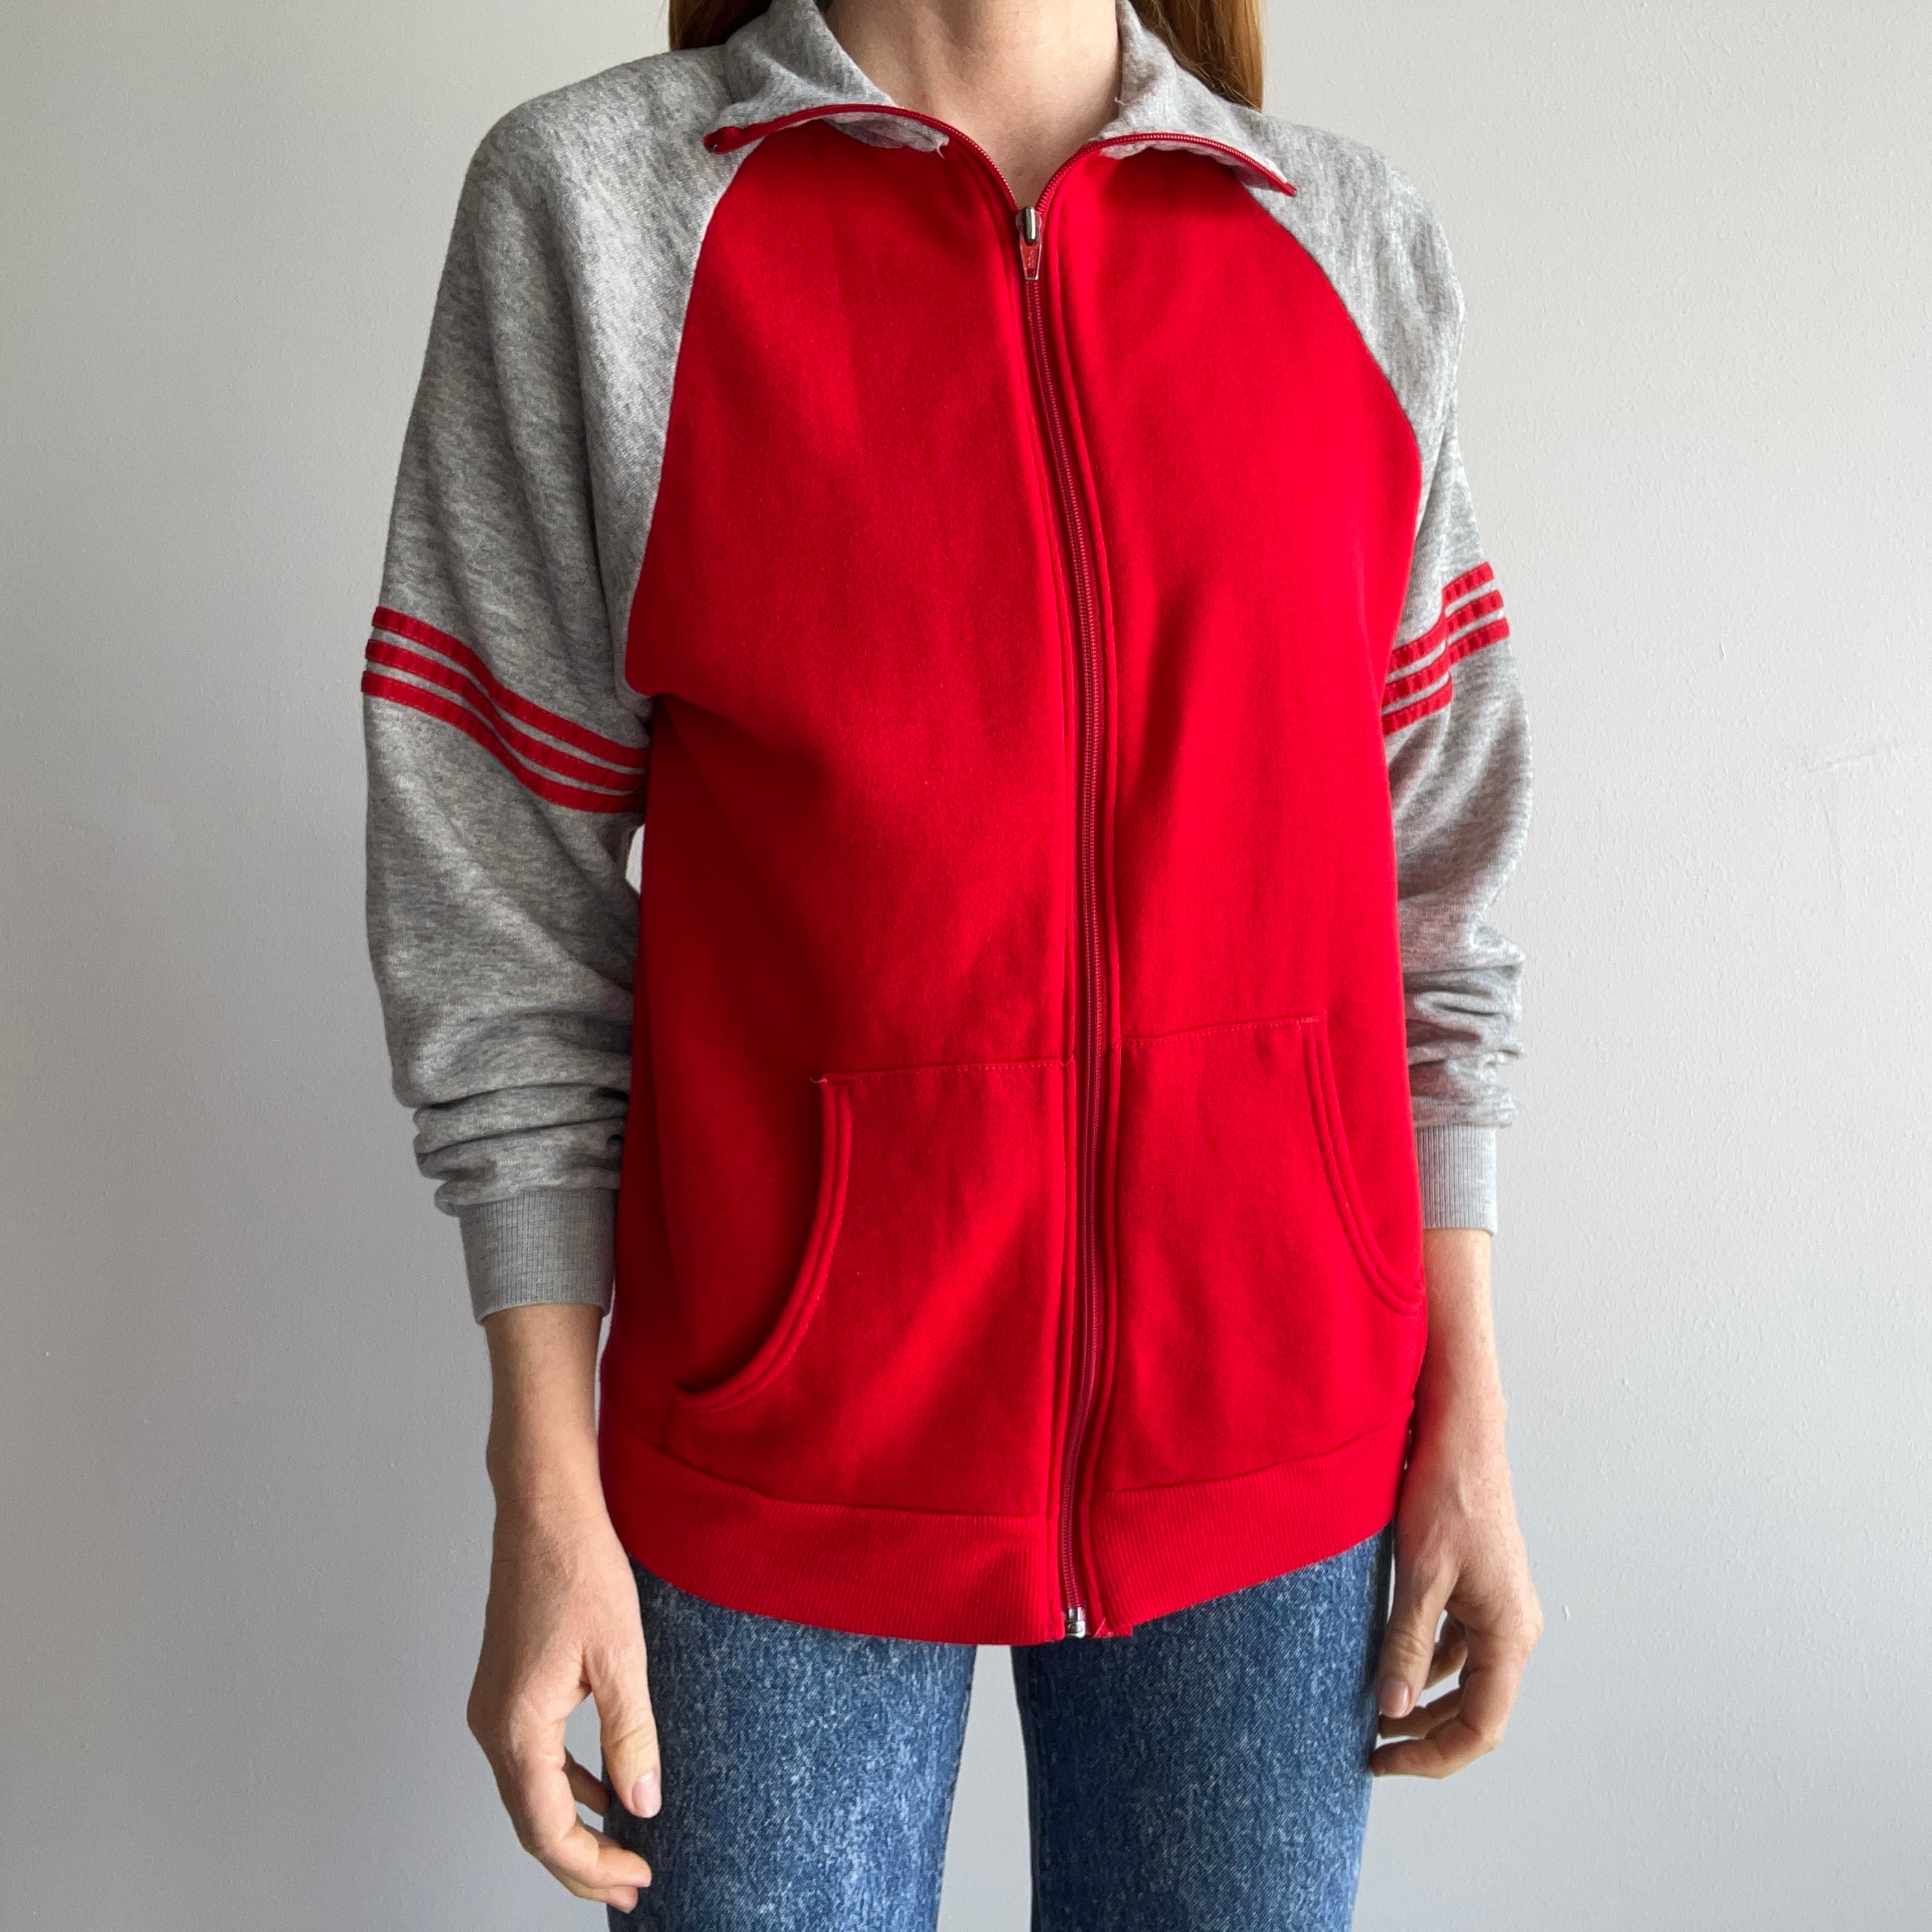 1970s Baseball Tracksuit Zip Up Mock Neck Delight - by Warm Up !